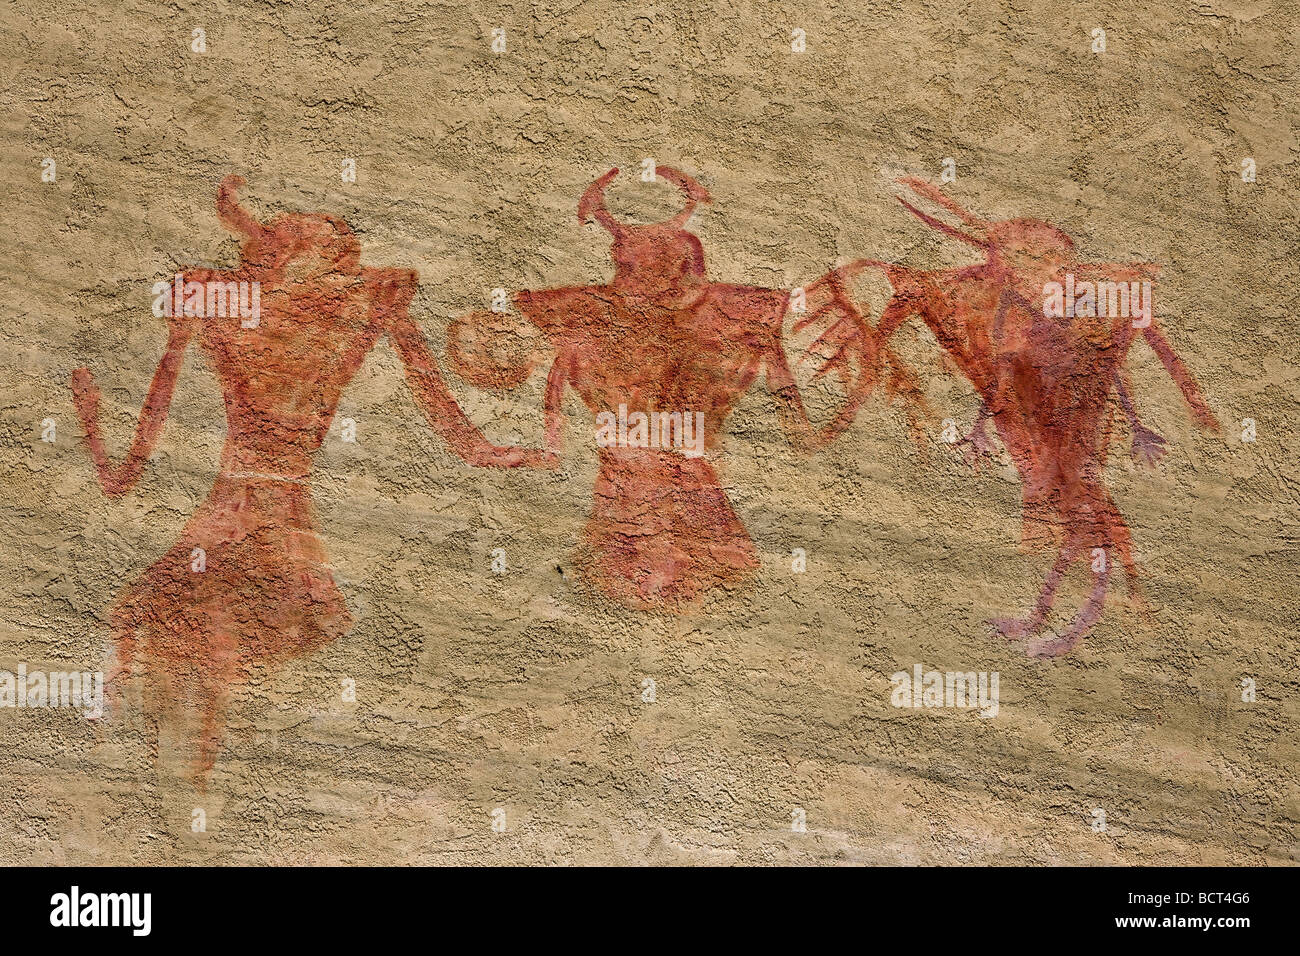 Replica of ancient Anasazi pictograph on a wall of an Anasazi museum in Grand Staircase Escalante National Monument Stock Photo